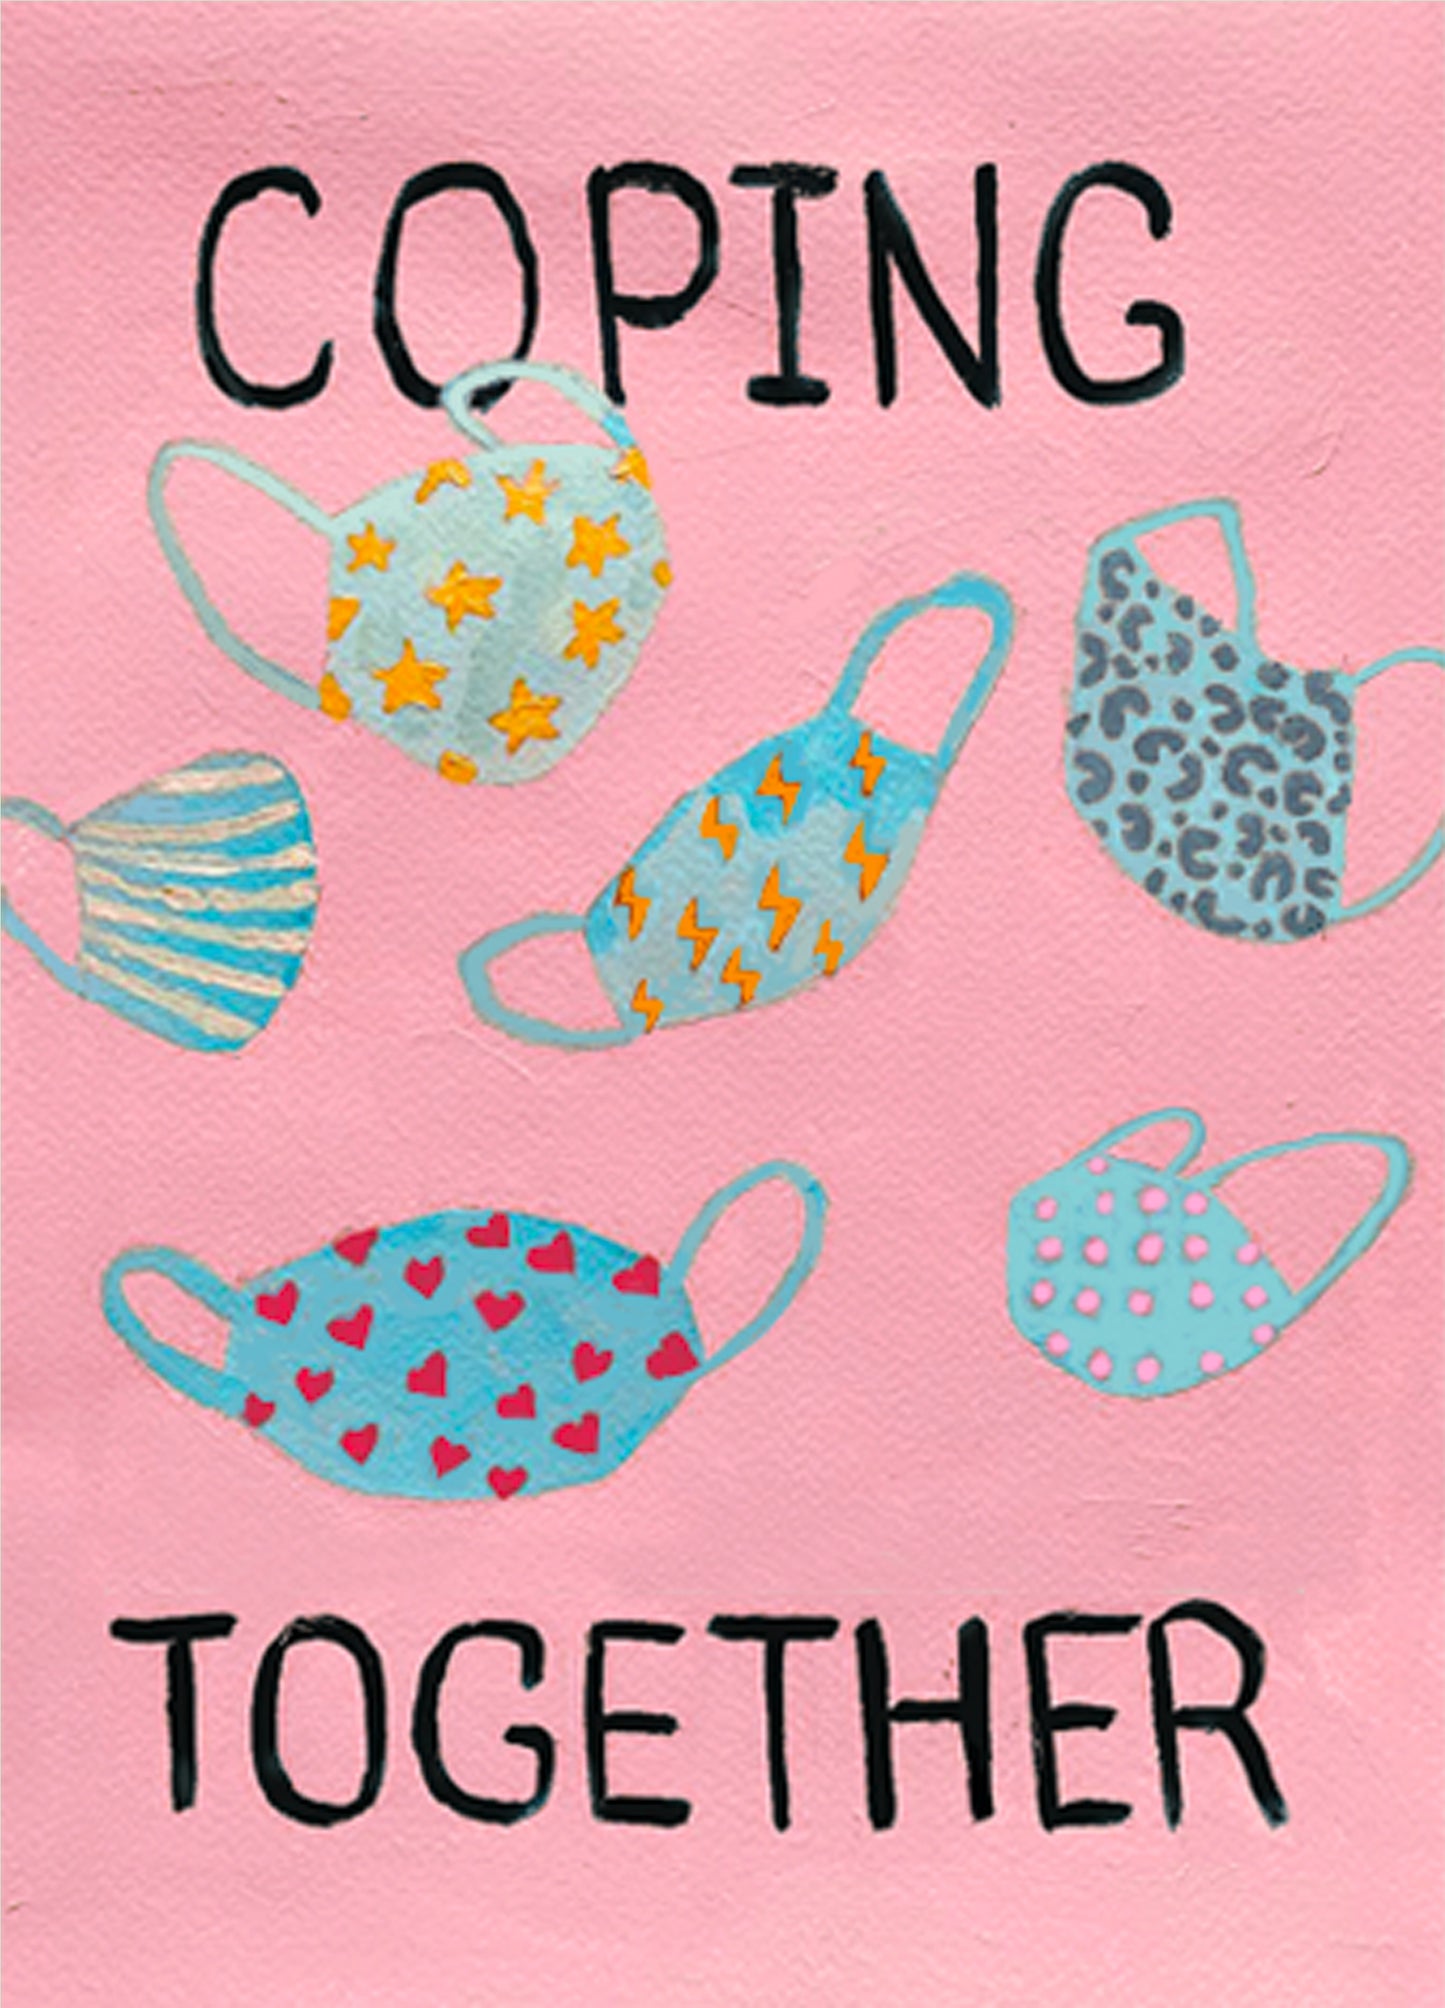 Coping Together. Original painting